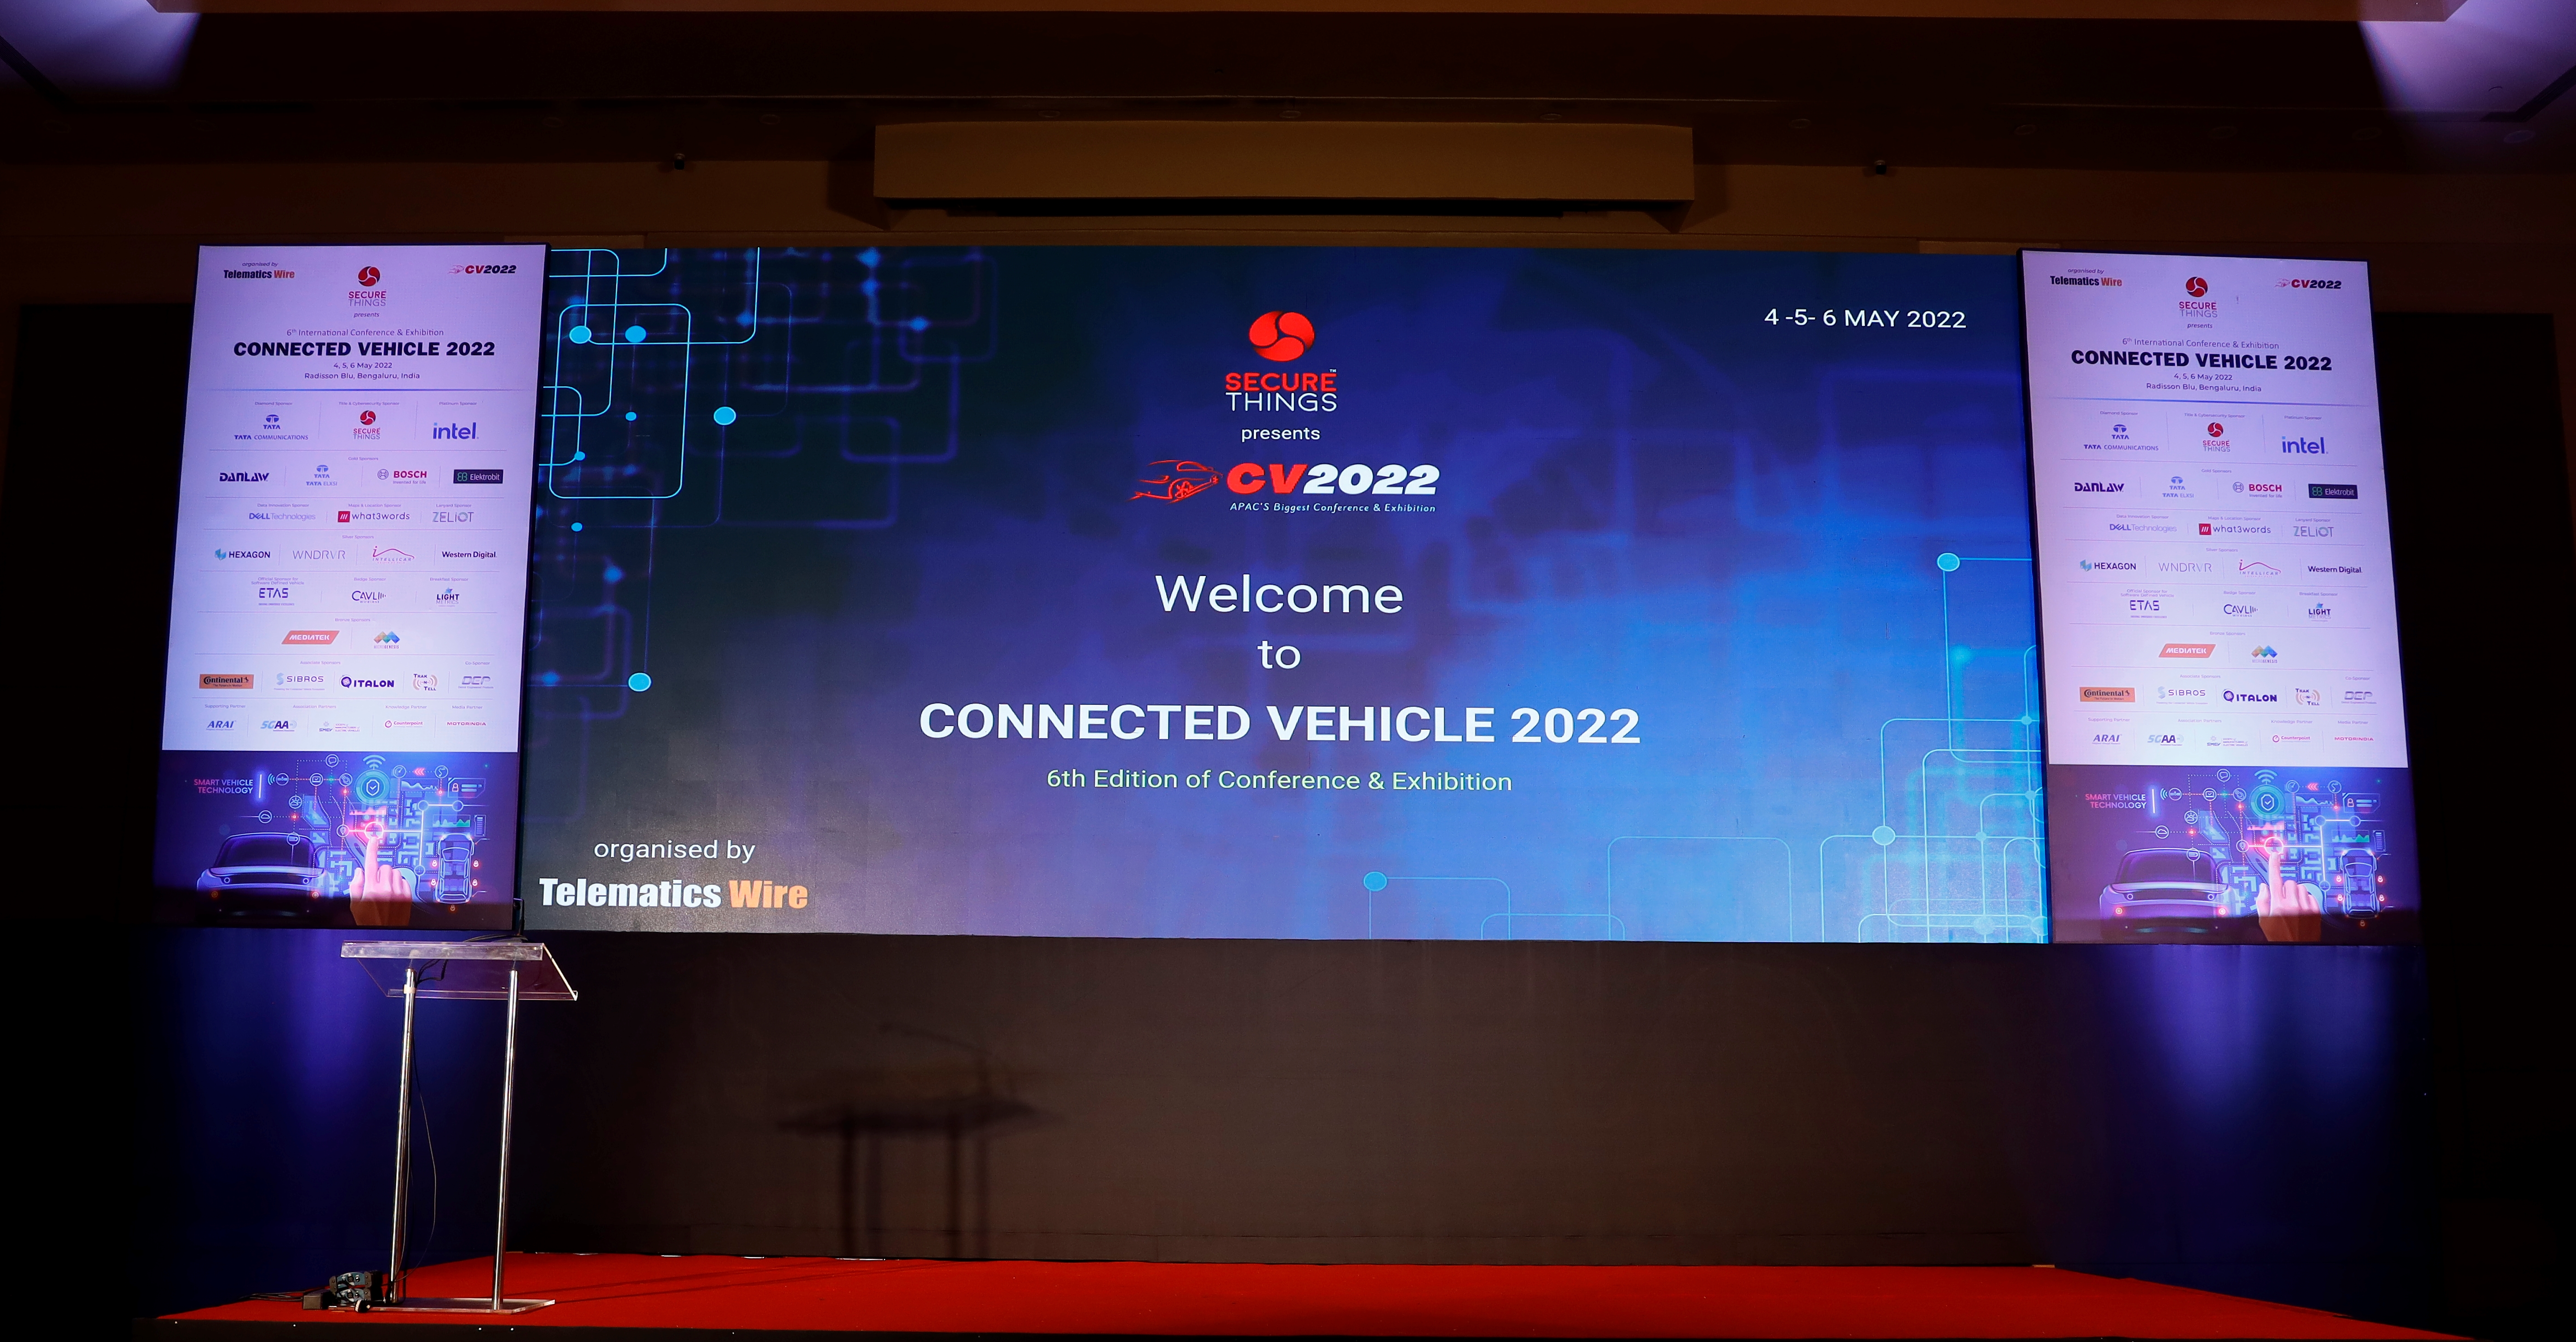 Connected Vehicle 2022 Summit: From ADAS to Autonomous Mobility, Here are Some Key Takeaways